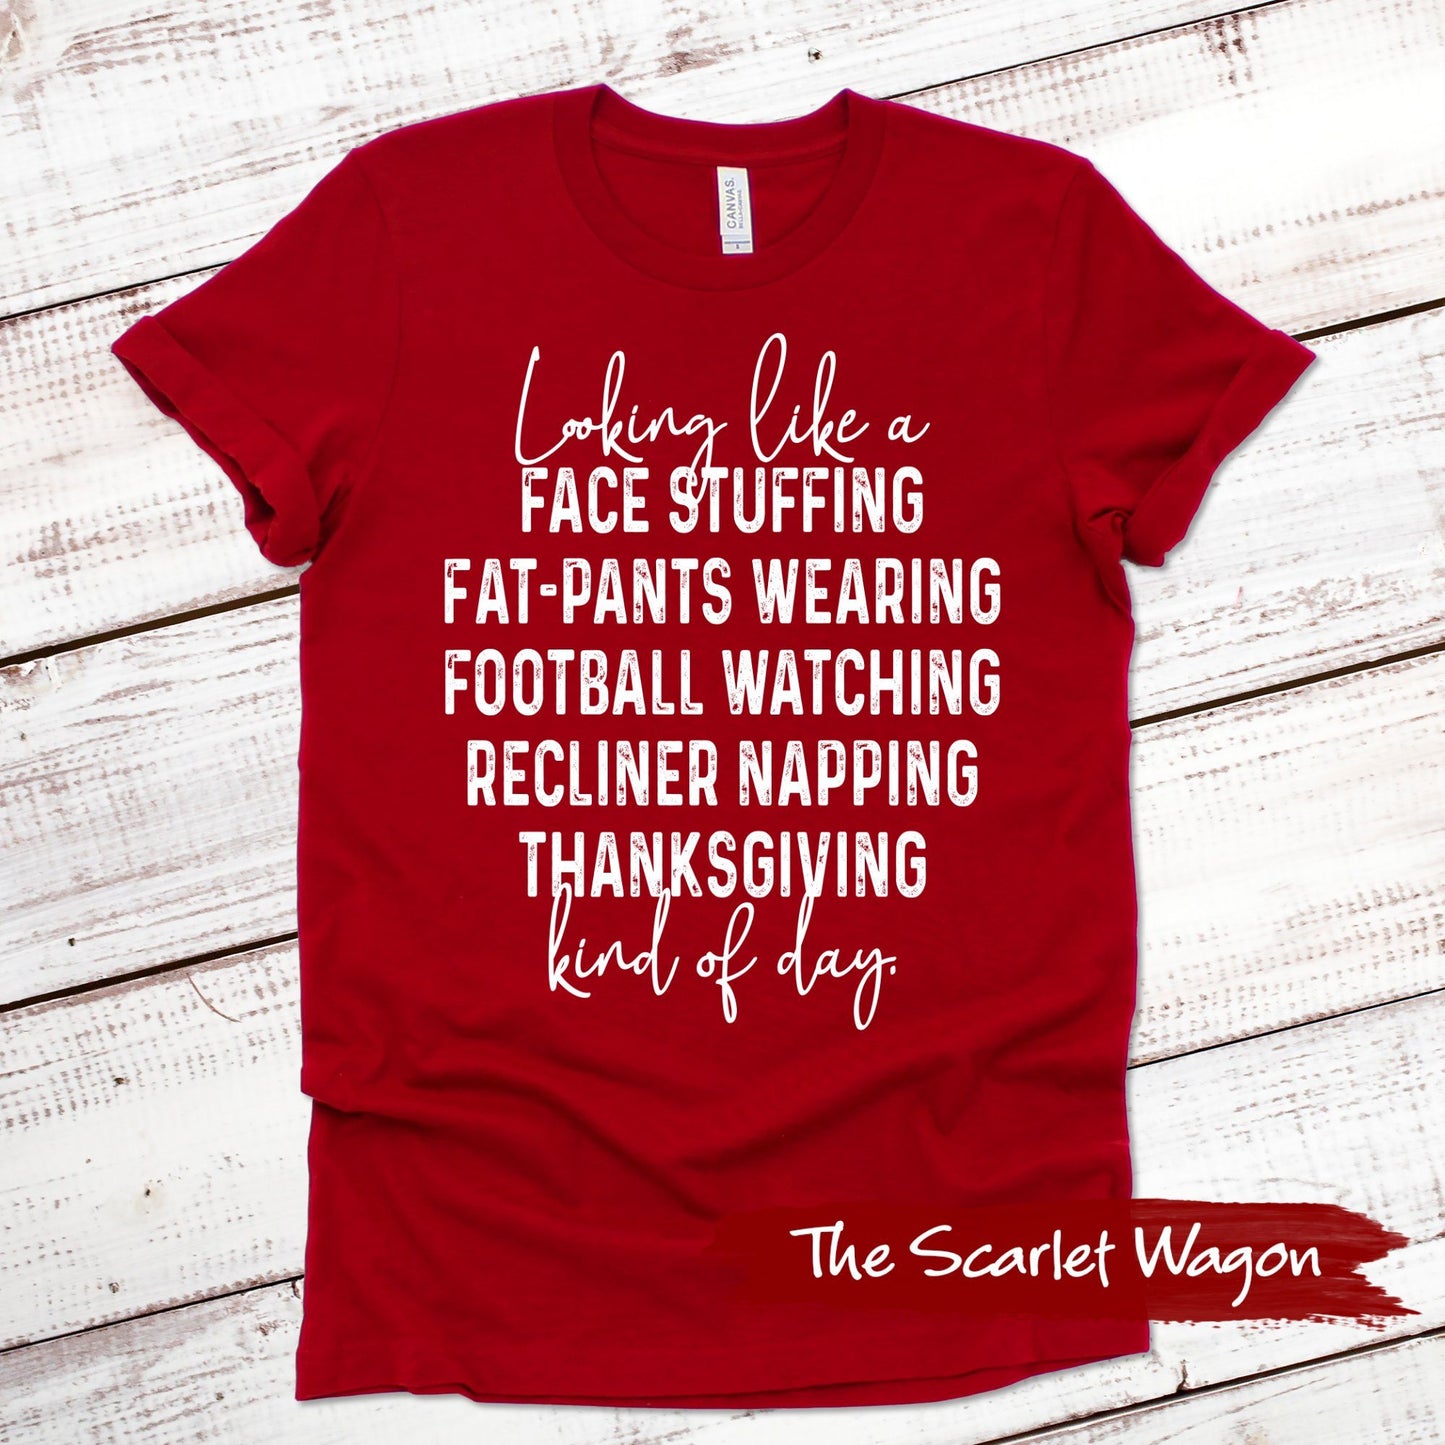 Football Thanksgiving Kind of Day Thanksgiving Shirt Scarlet Wagon Red XS 